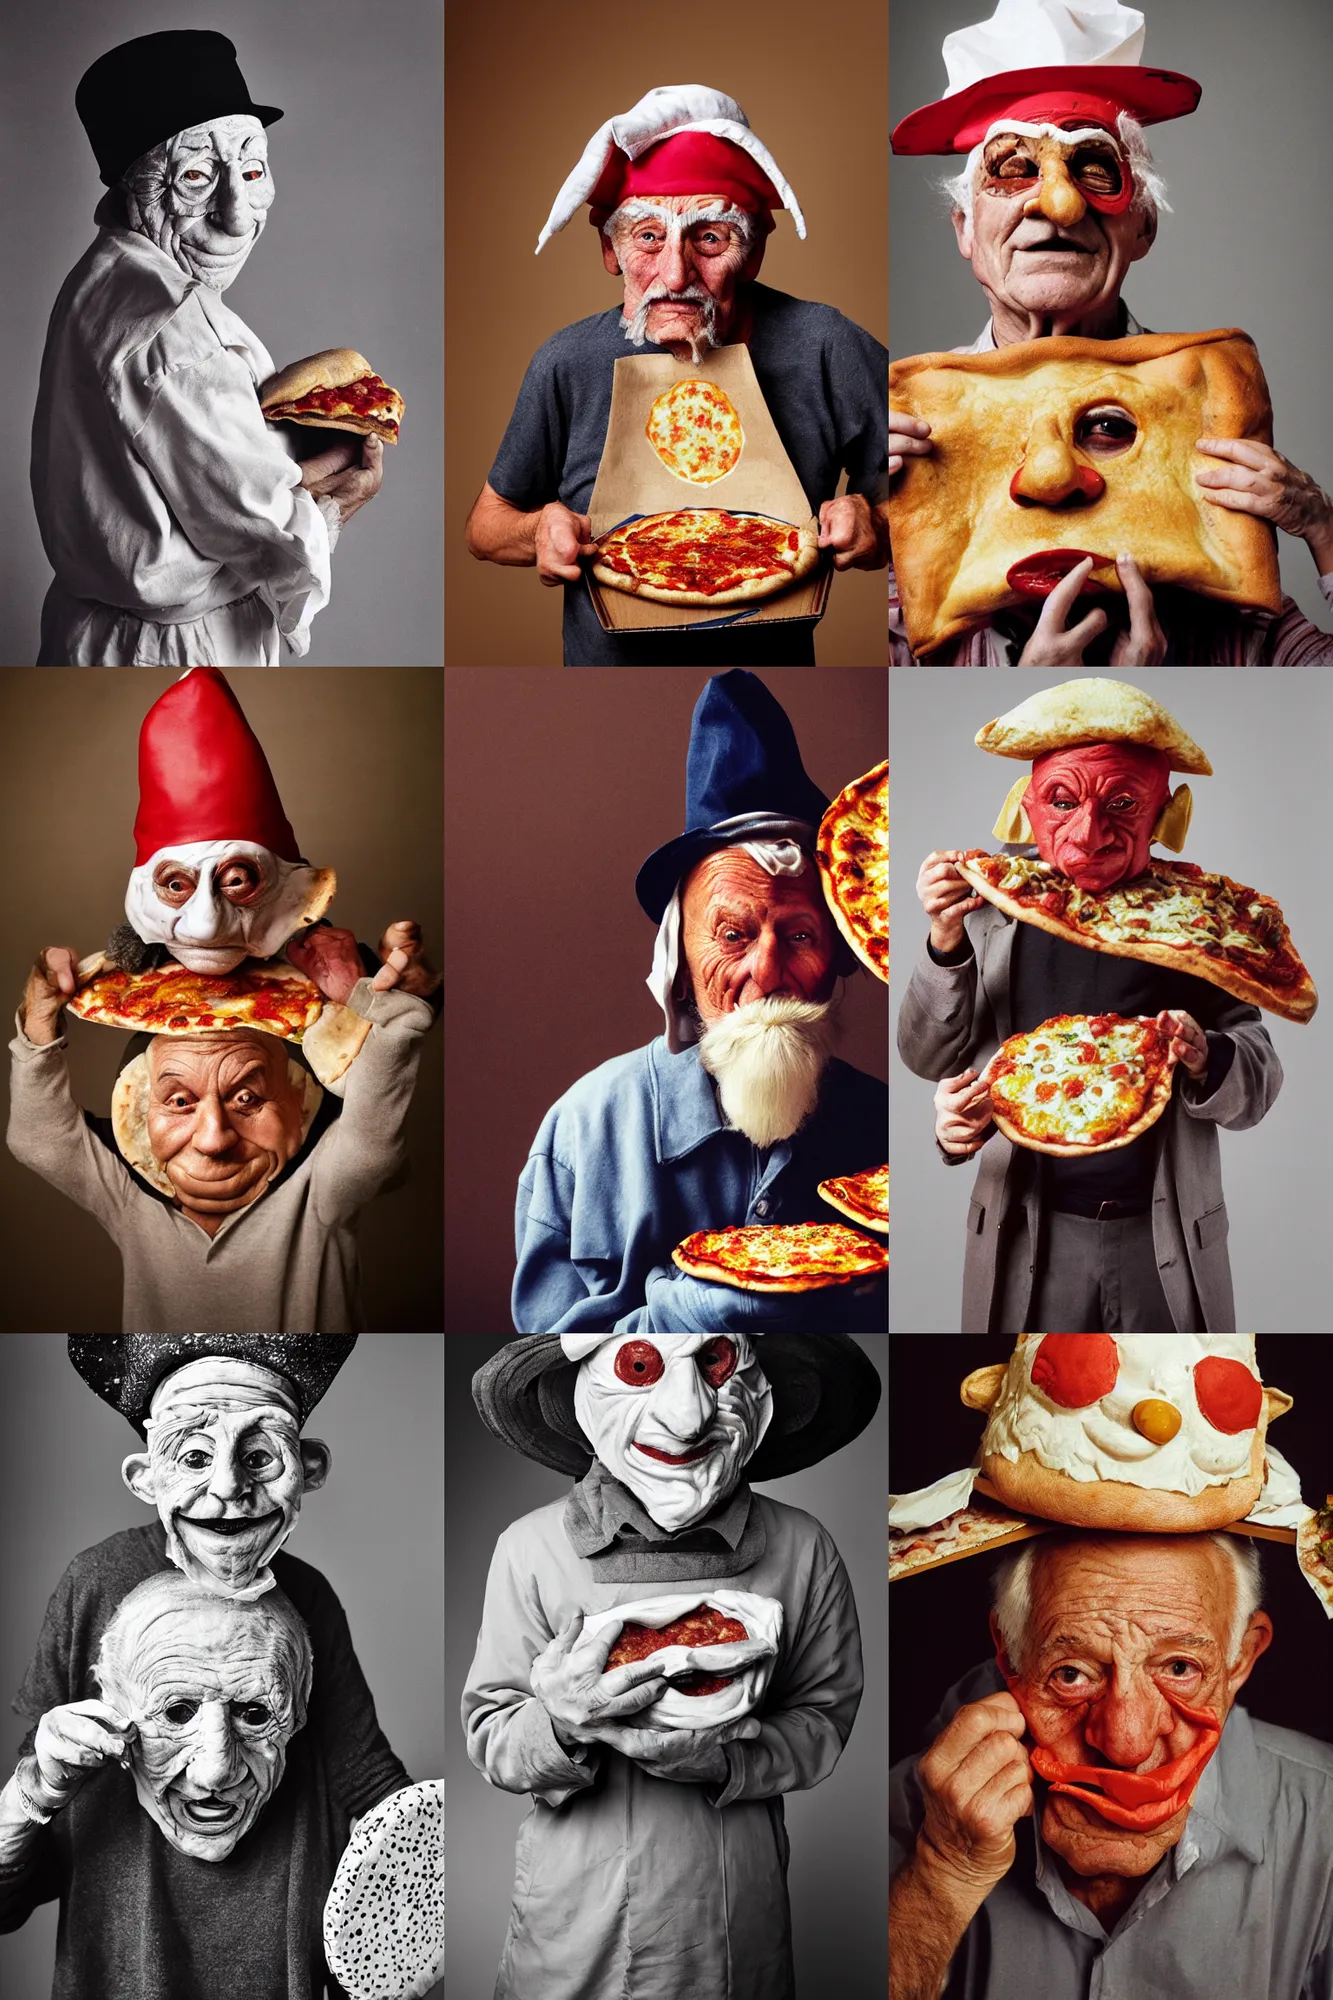 Prompt: close - up portrait of a wrinkled old man wearing a pulcinella mask holding up a pizza!! to behold, clear eyes looking into camera, baggy clothing and hat, masterpiece photo by annie leibovitz